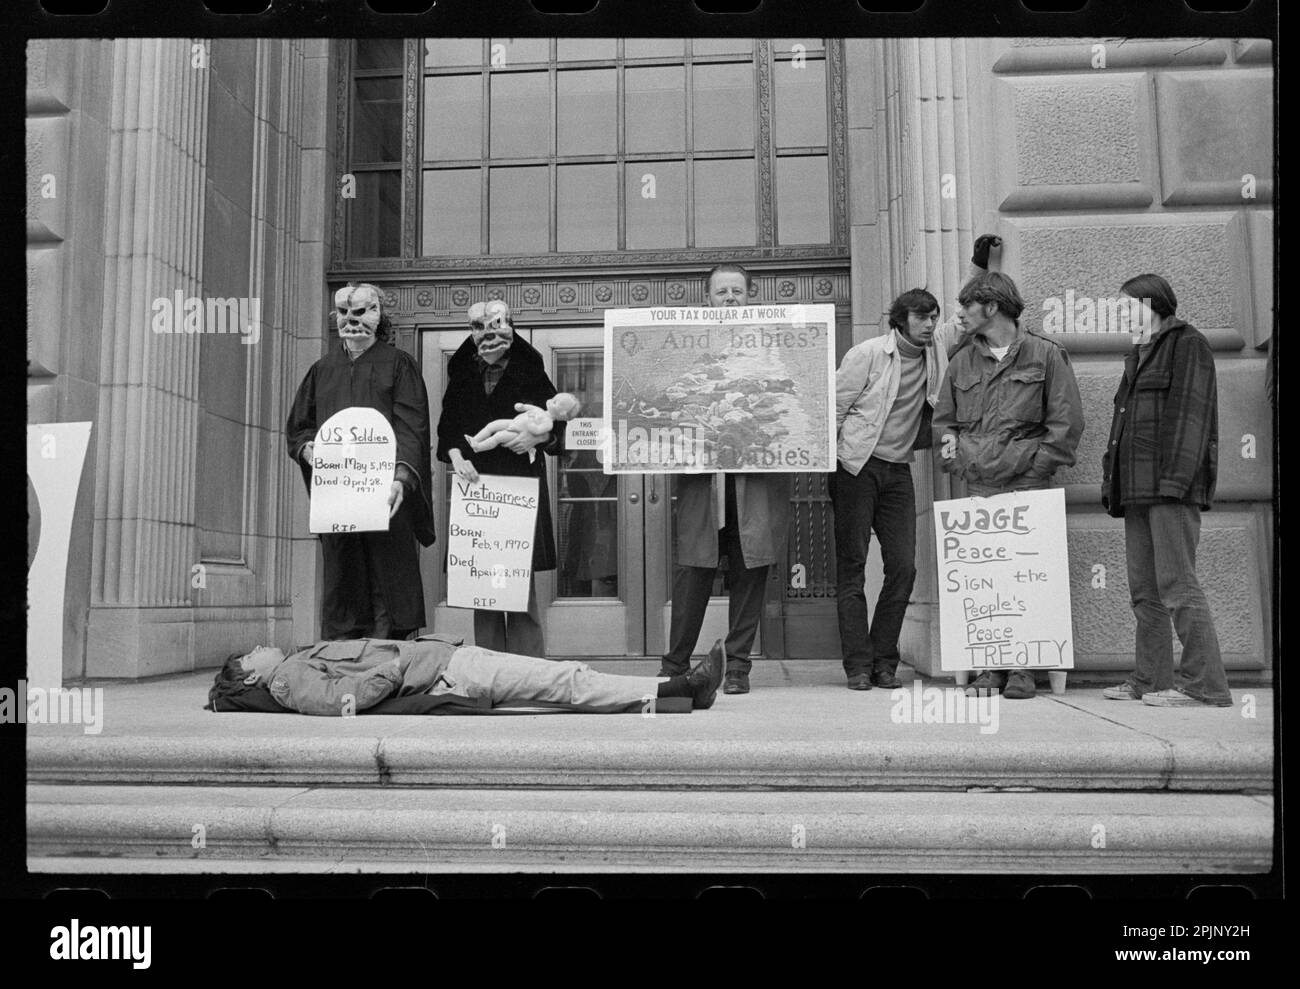 ANTI-WAR DEMONSTRATION AT I.R.S. with young Man lying on the ground and others wearing masks and carrying signs protesting the My Lai Massacre in Vietnam, Washington, DC, 4/28/1971. (Photo by Warren K Leffler/US News and World Report Collection) Stock Photo